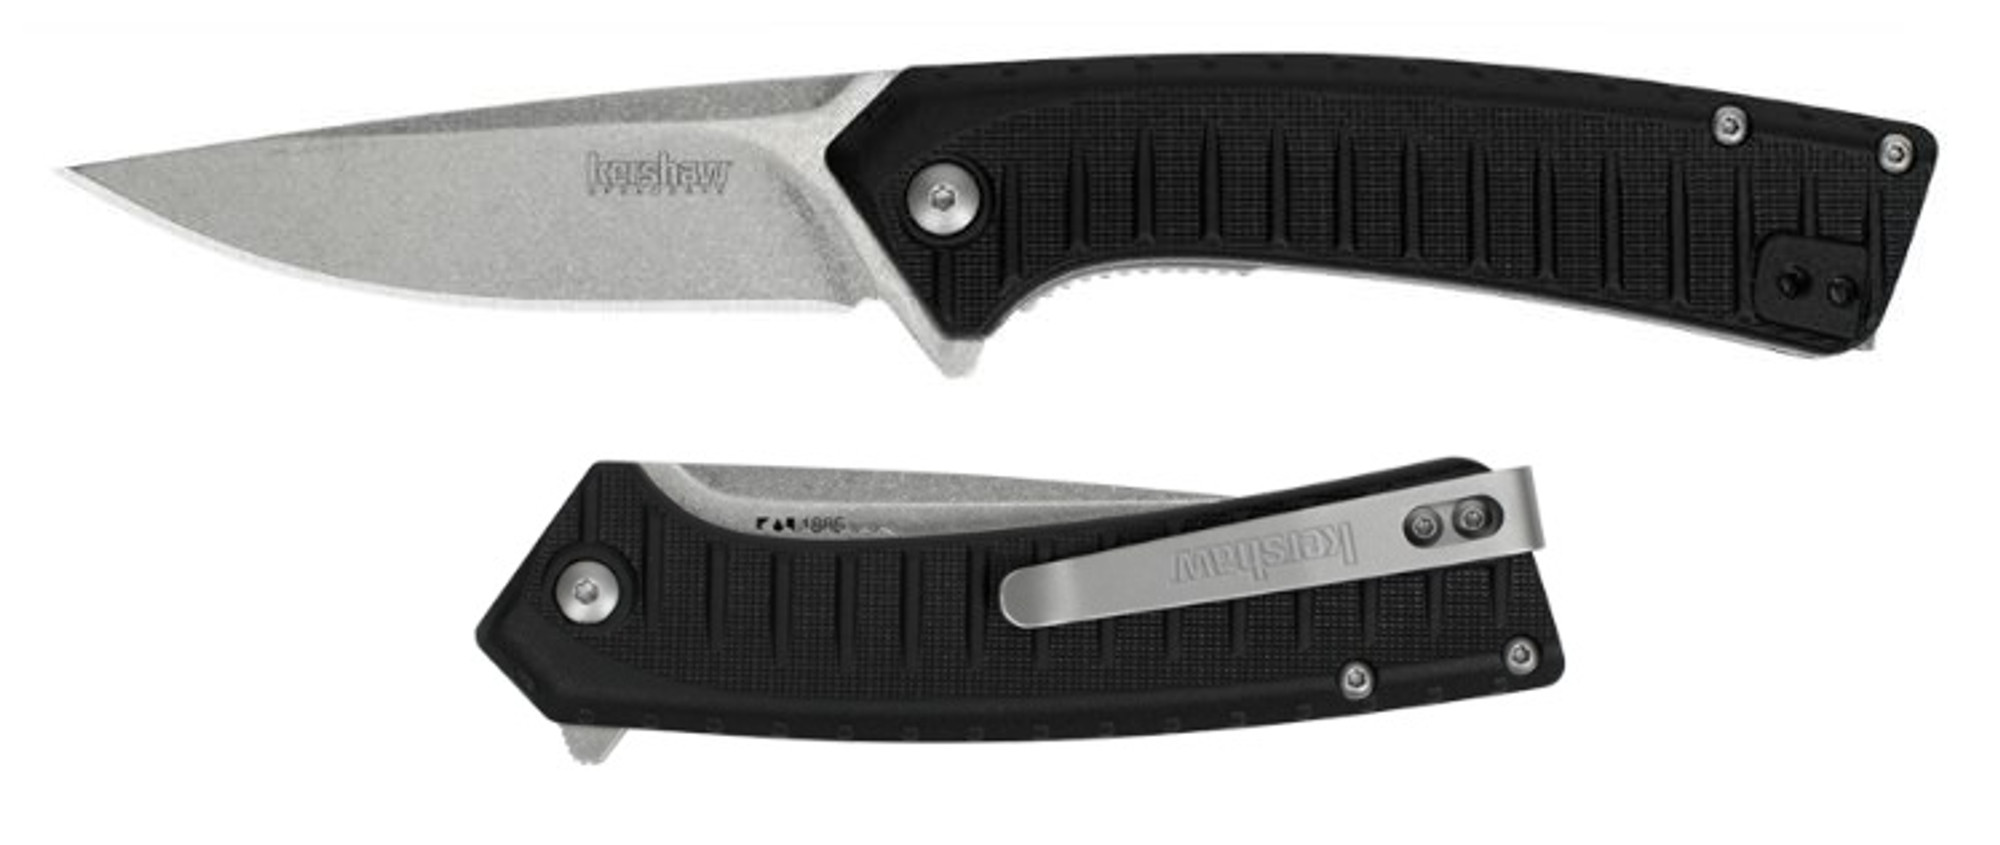 Kershaw 1885 Entropy Assisted Opening